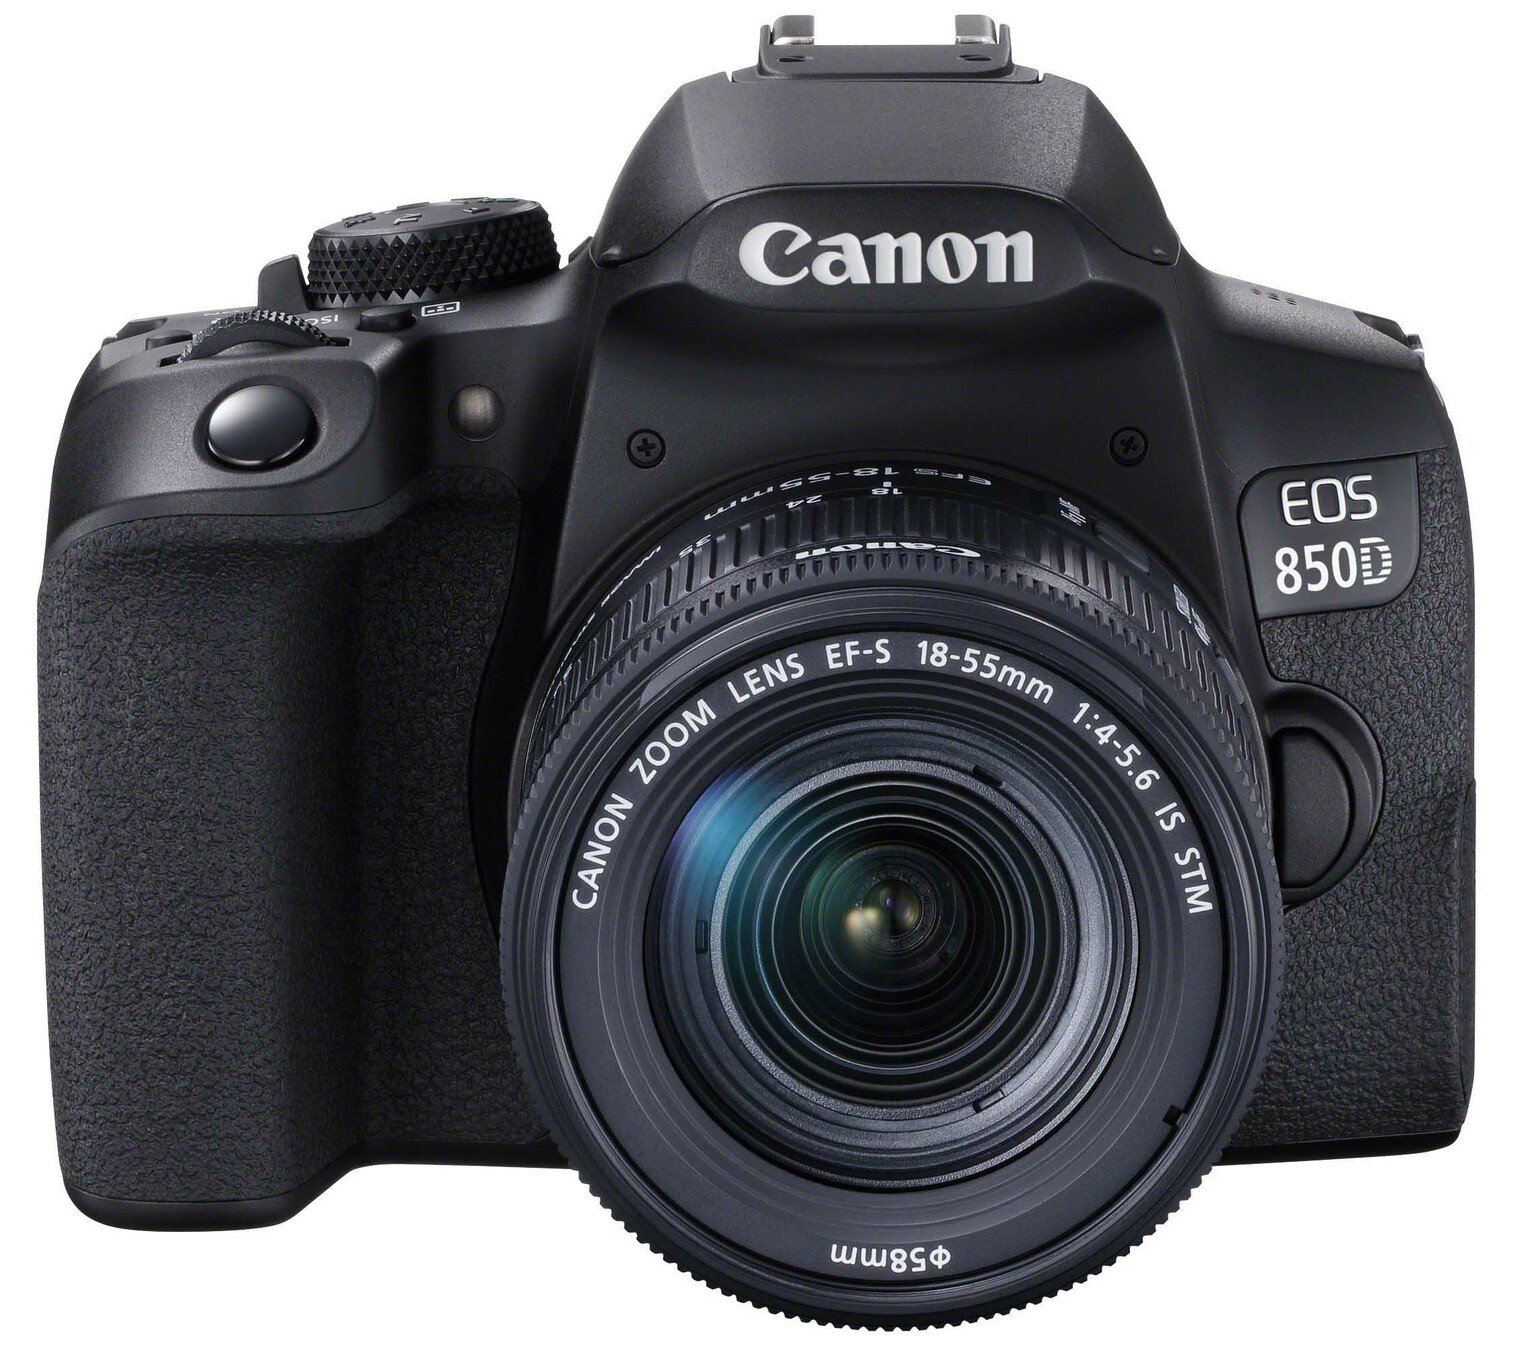 Canon EOS 850D 18-55mm Camera Kit Review